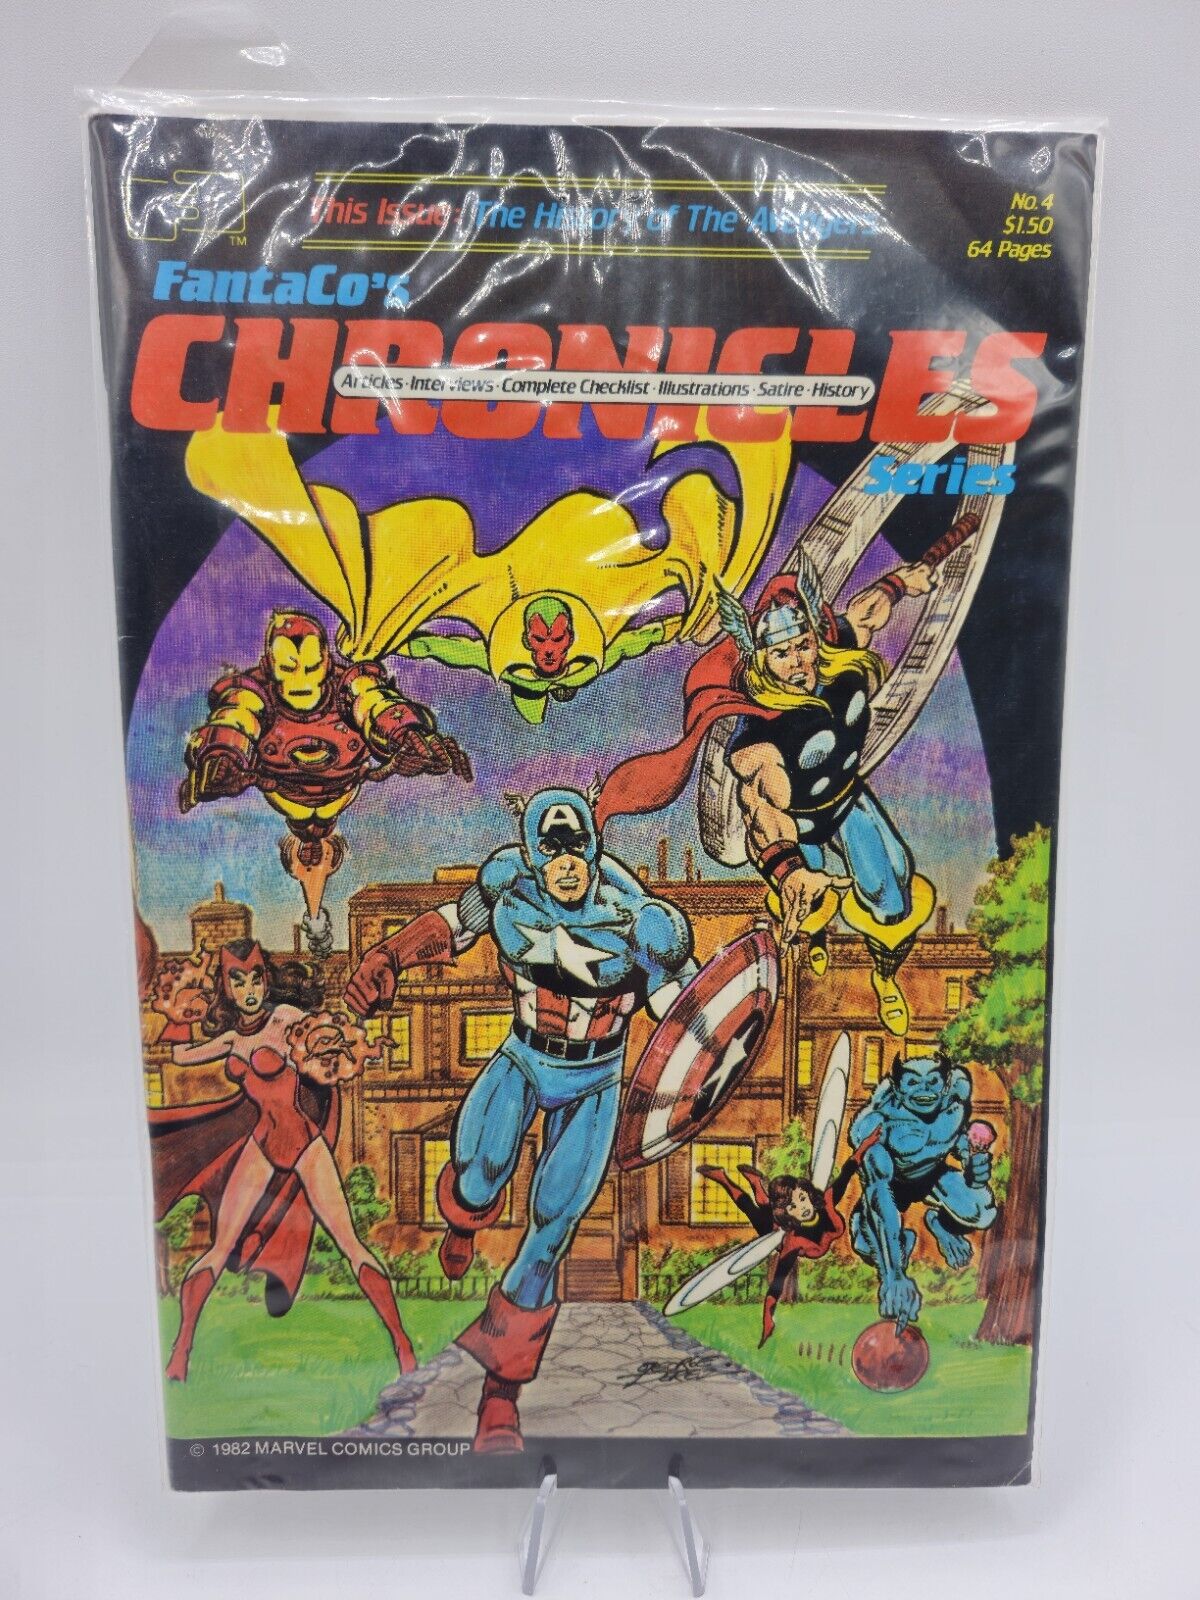 FantaCo's Chronicles (1982) #4 (feat THE AVENGERS - cover by George Perez)